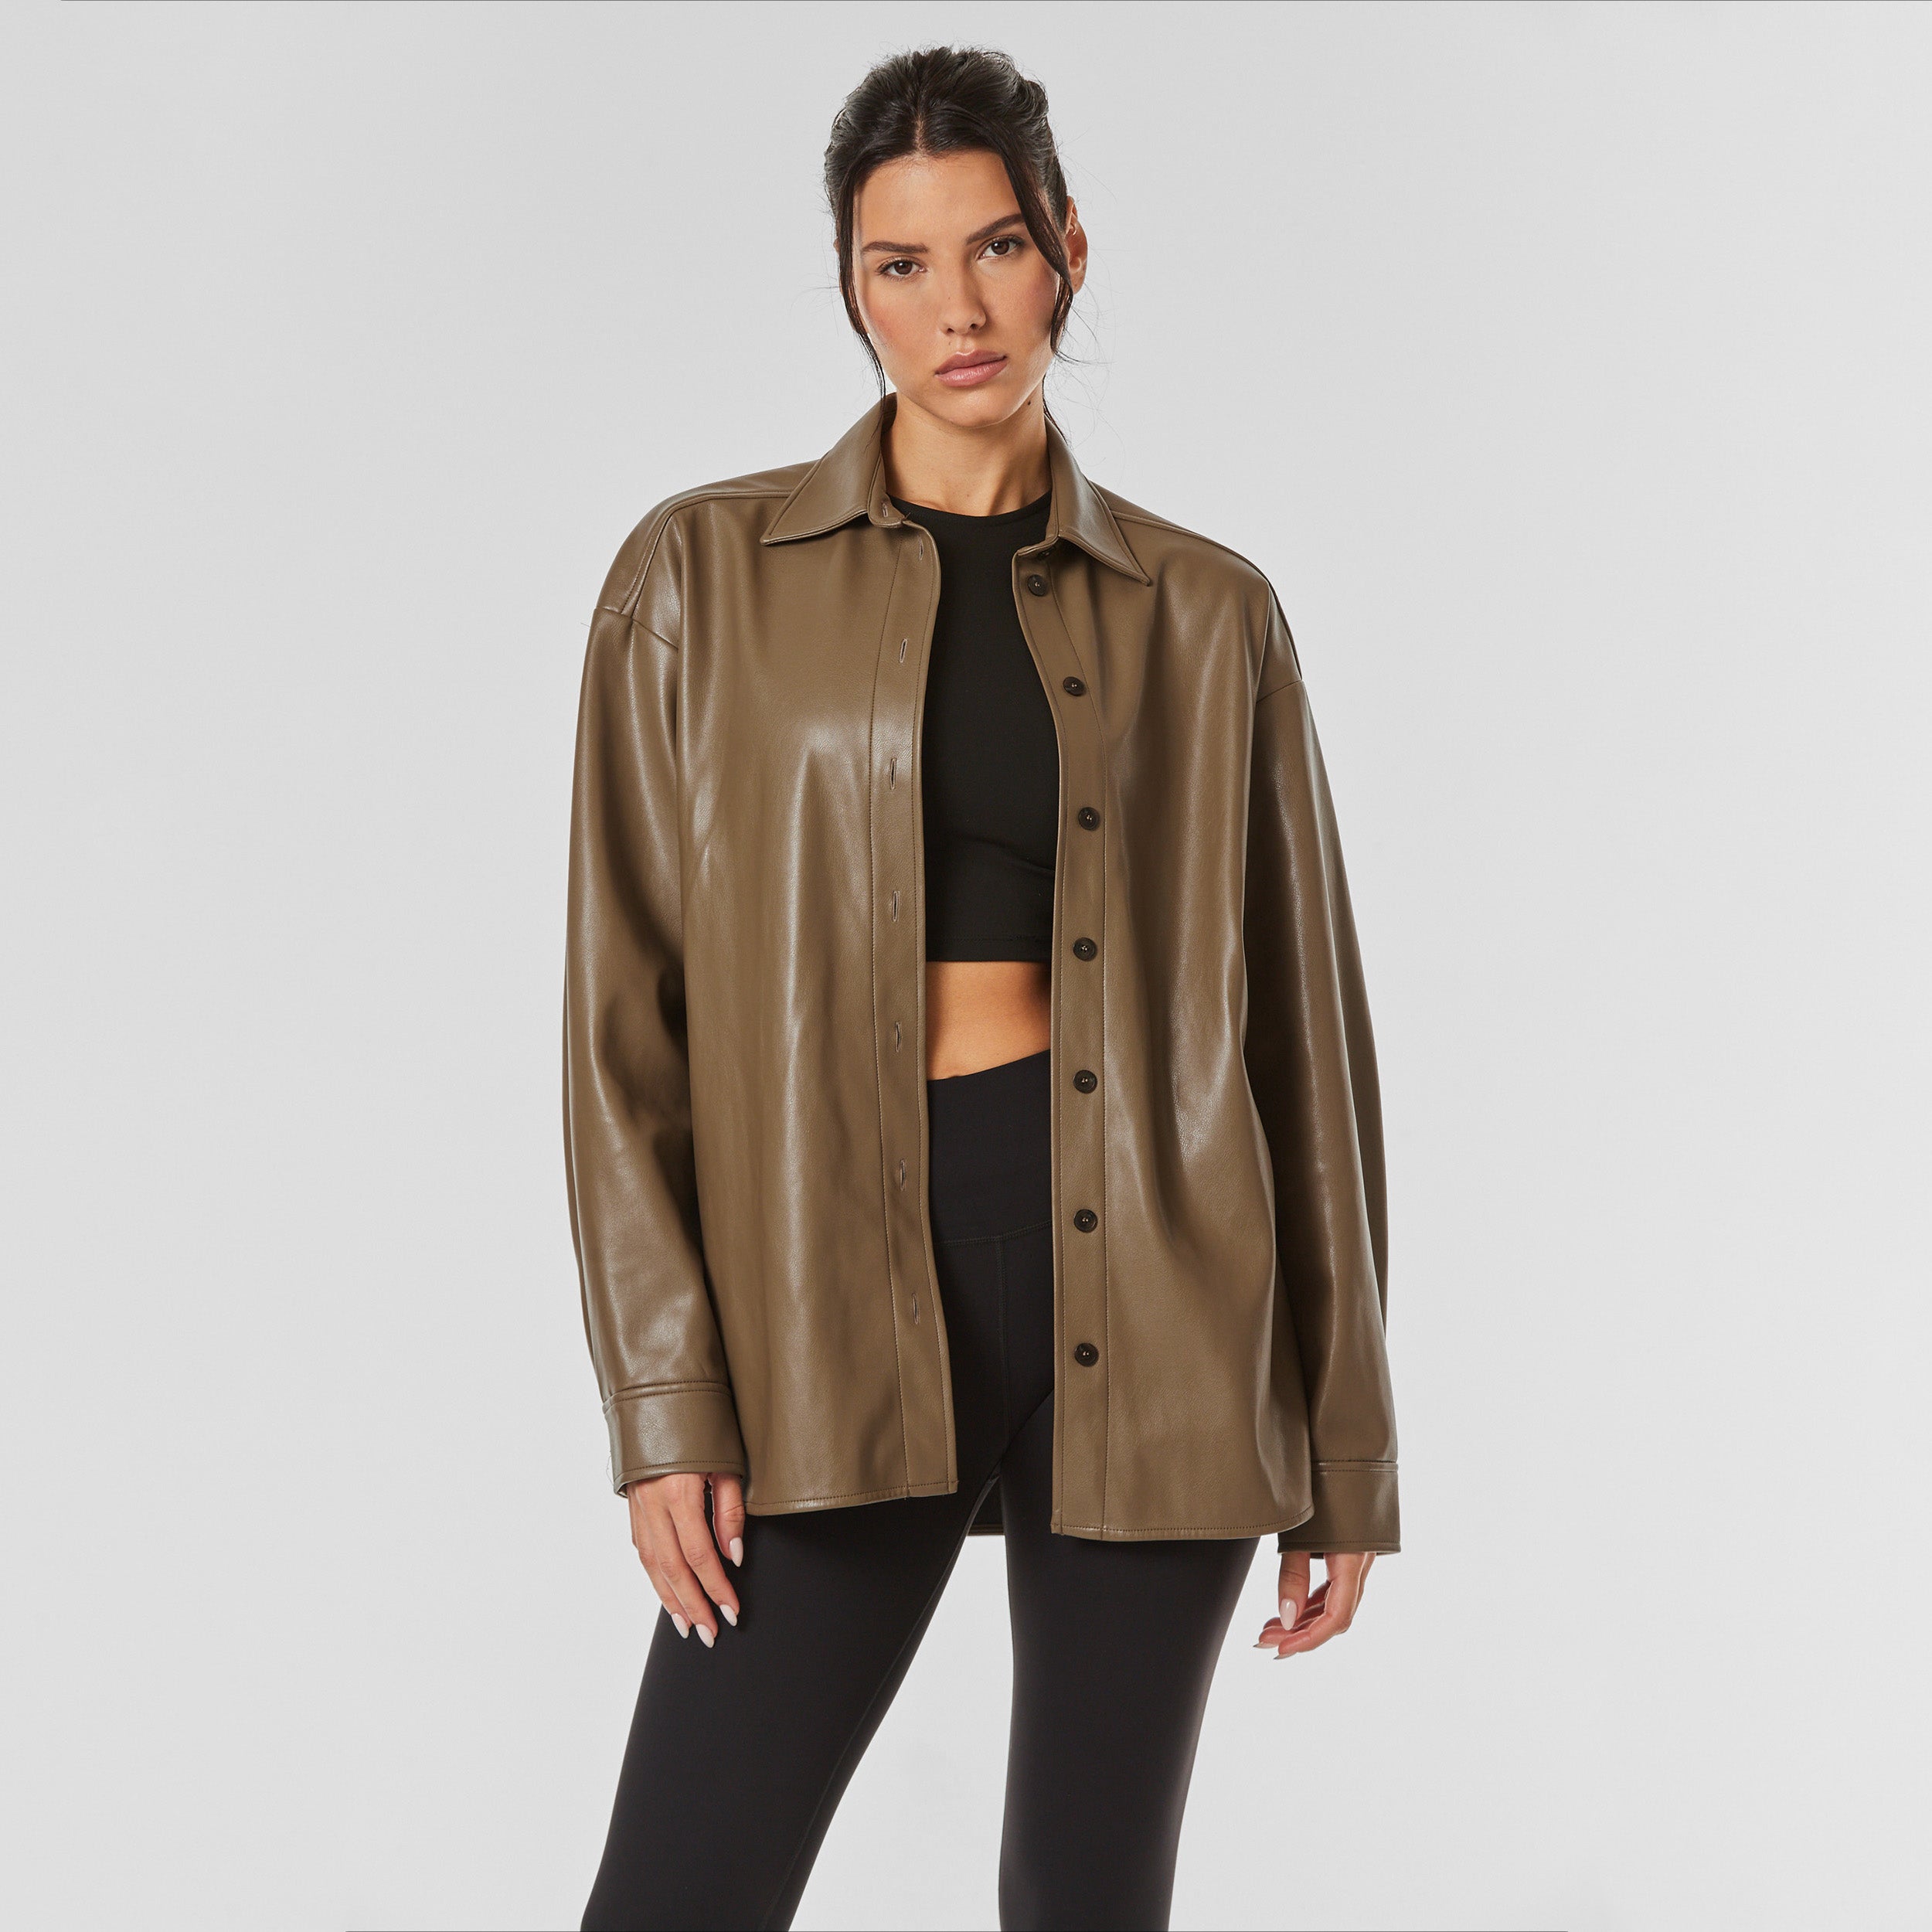 Front view of woman wearing brown faux leather oversized shirt jacket.